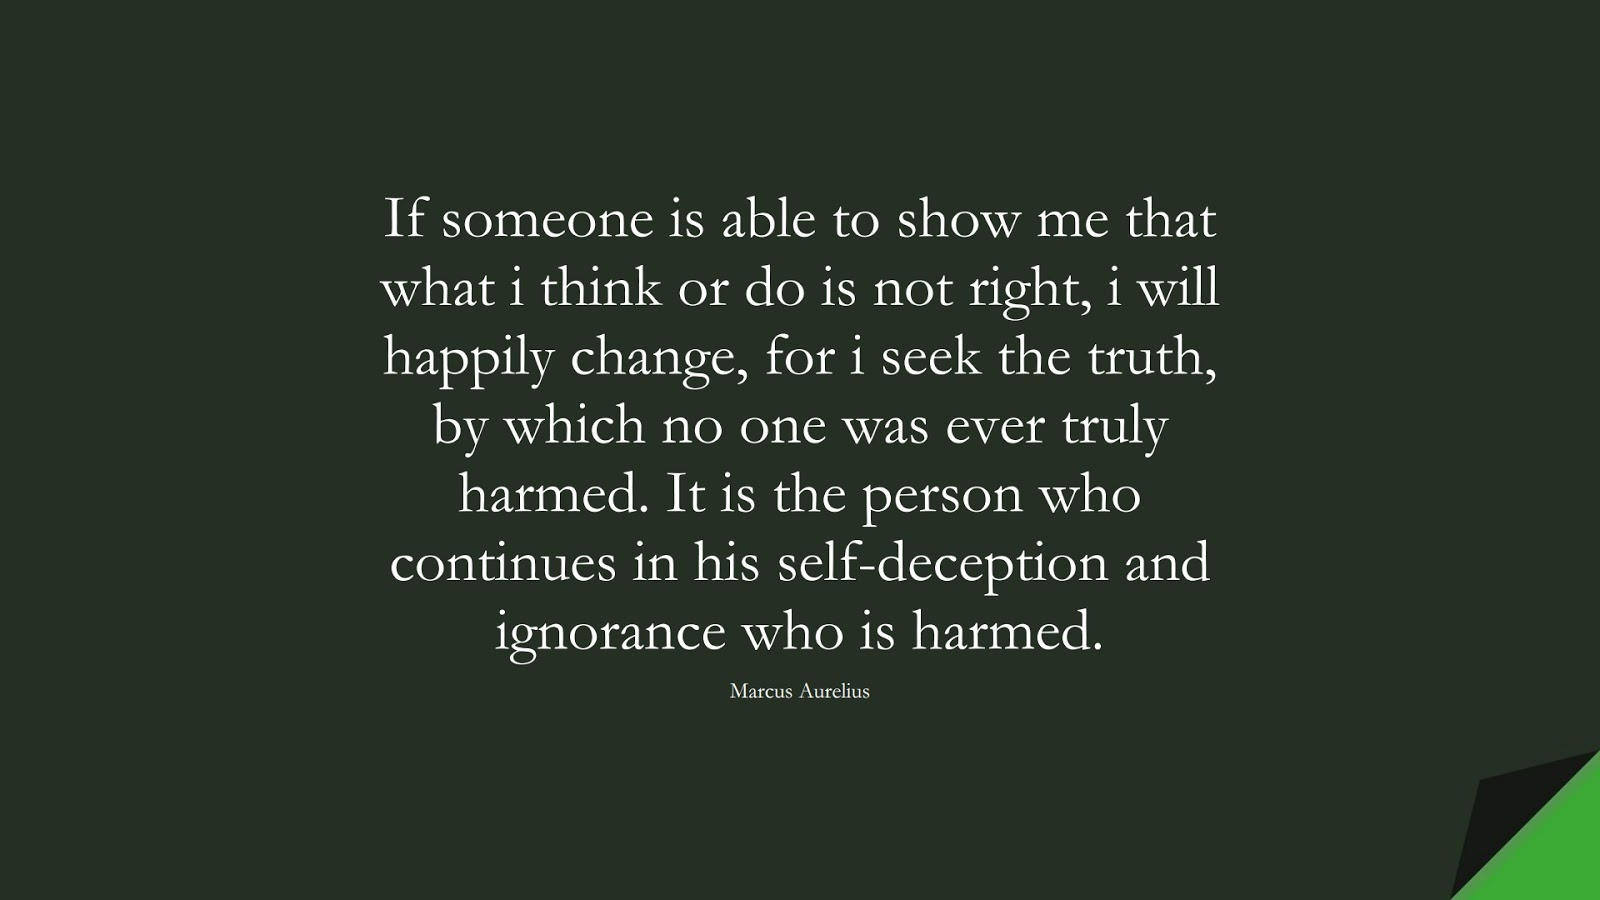 If someone is able to show me that what i think or do is not right, i will happily change, for i seek the truth, by which no one was ever truly harmed. It is the person who continues in his self-deception and ignorance who is harmed. (Marcus Aurelius);  #MarcusAureliusQuotes